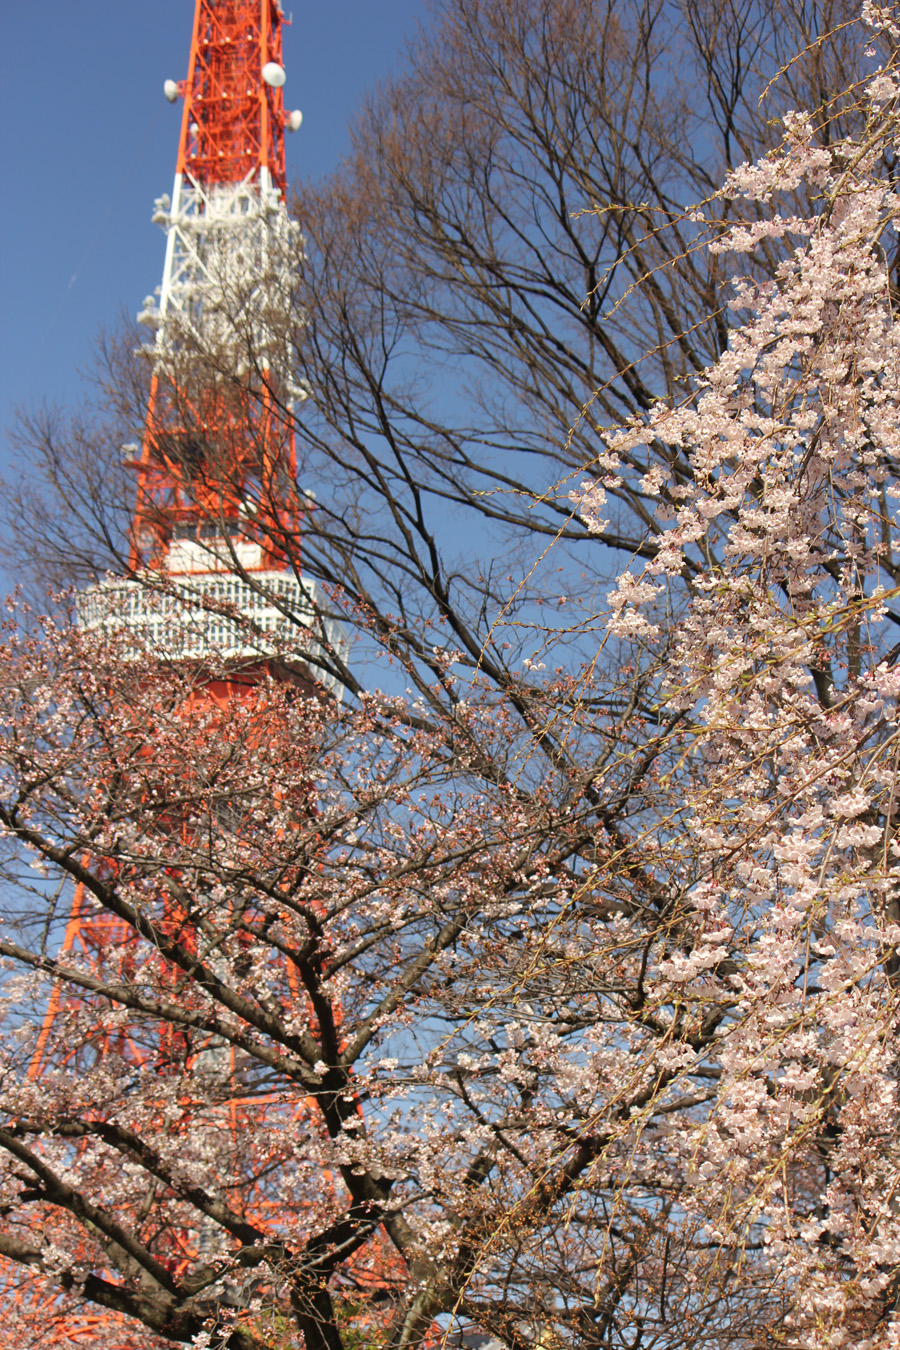 Tokyo's signature: Tokyo Tower and cherry blossoms